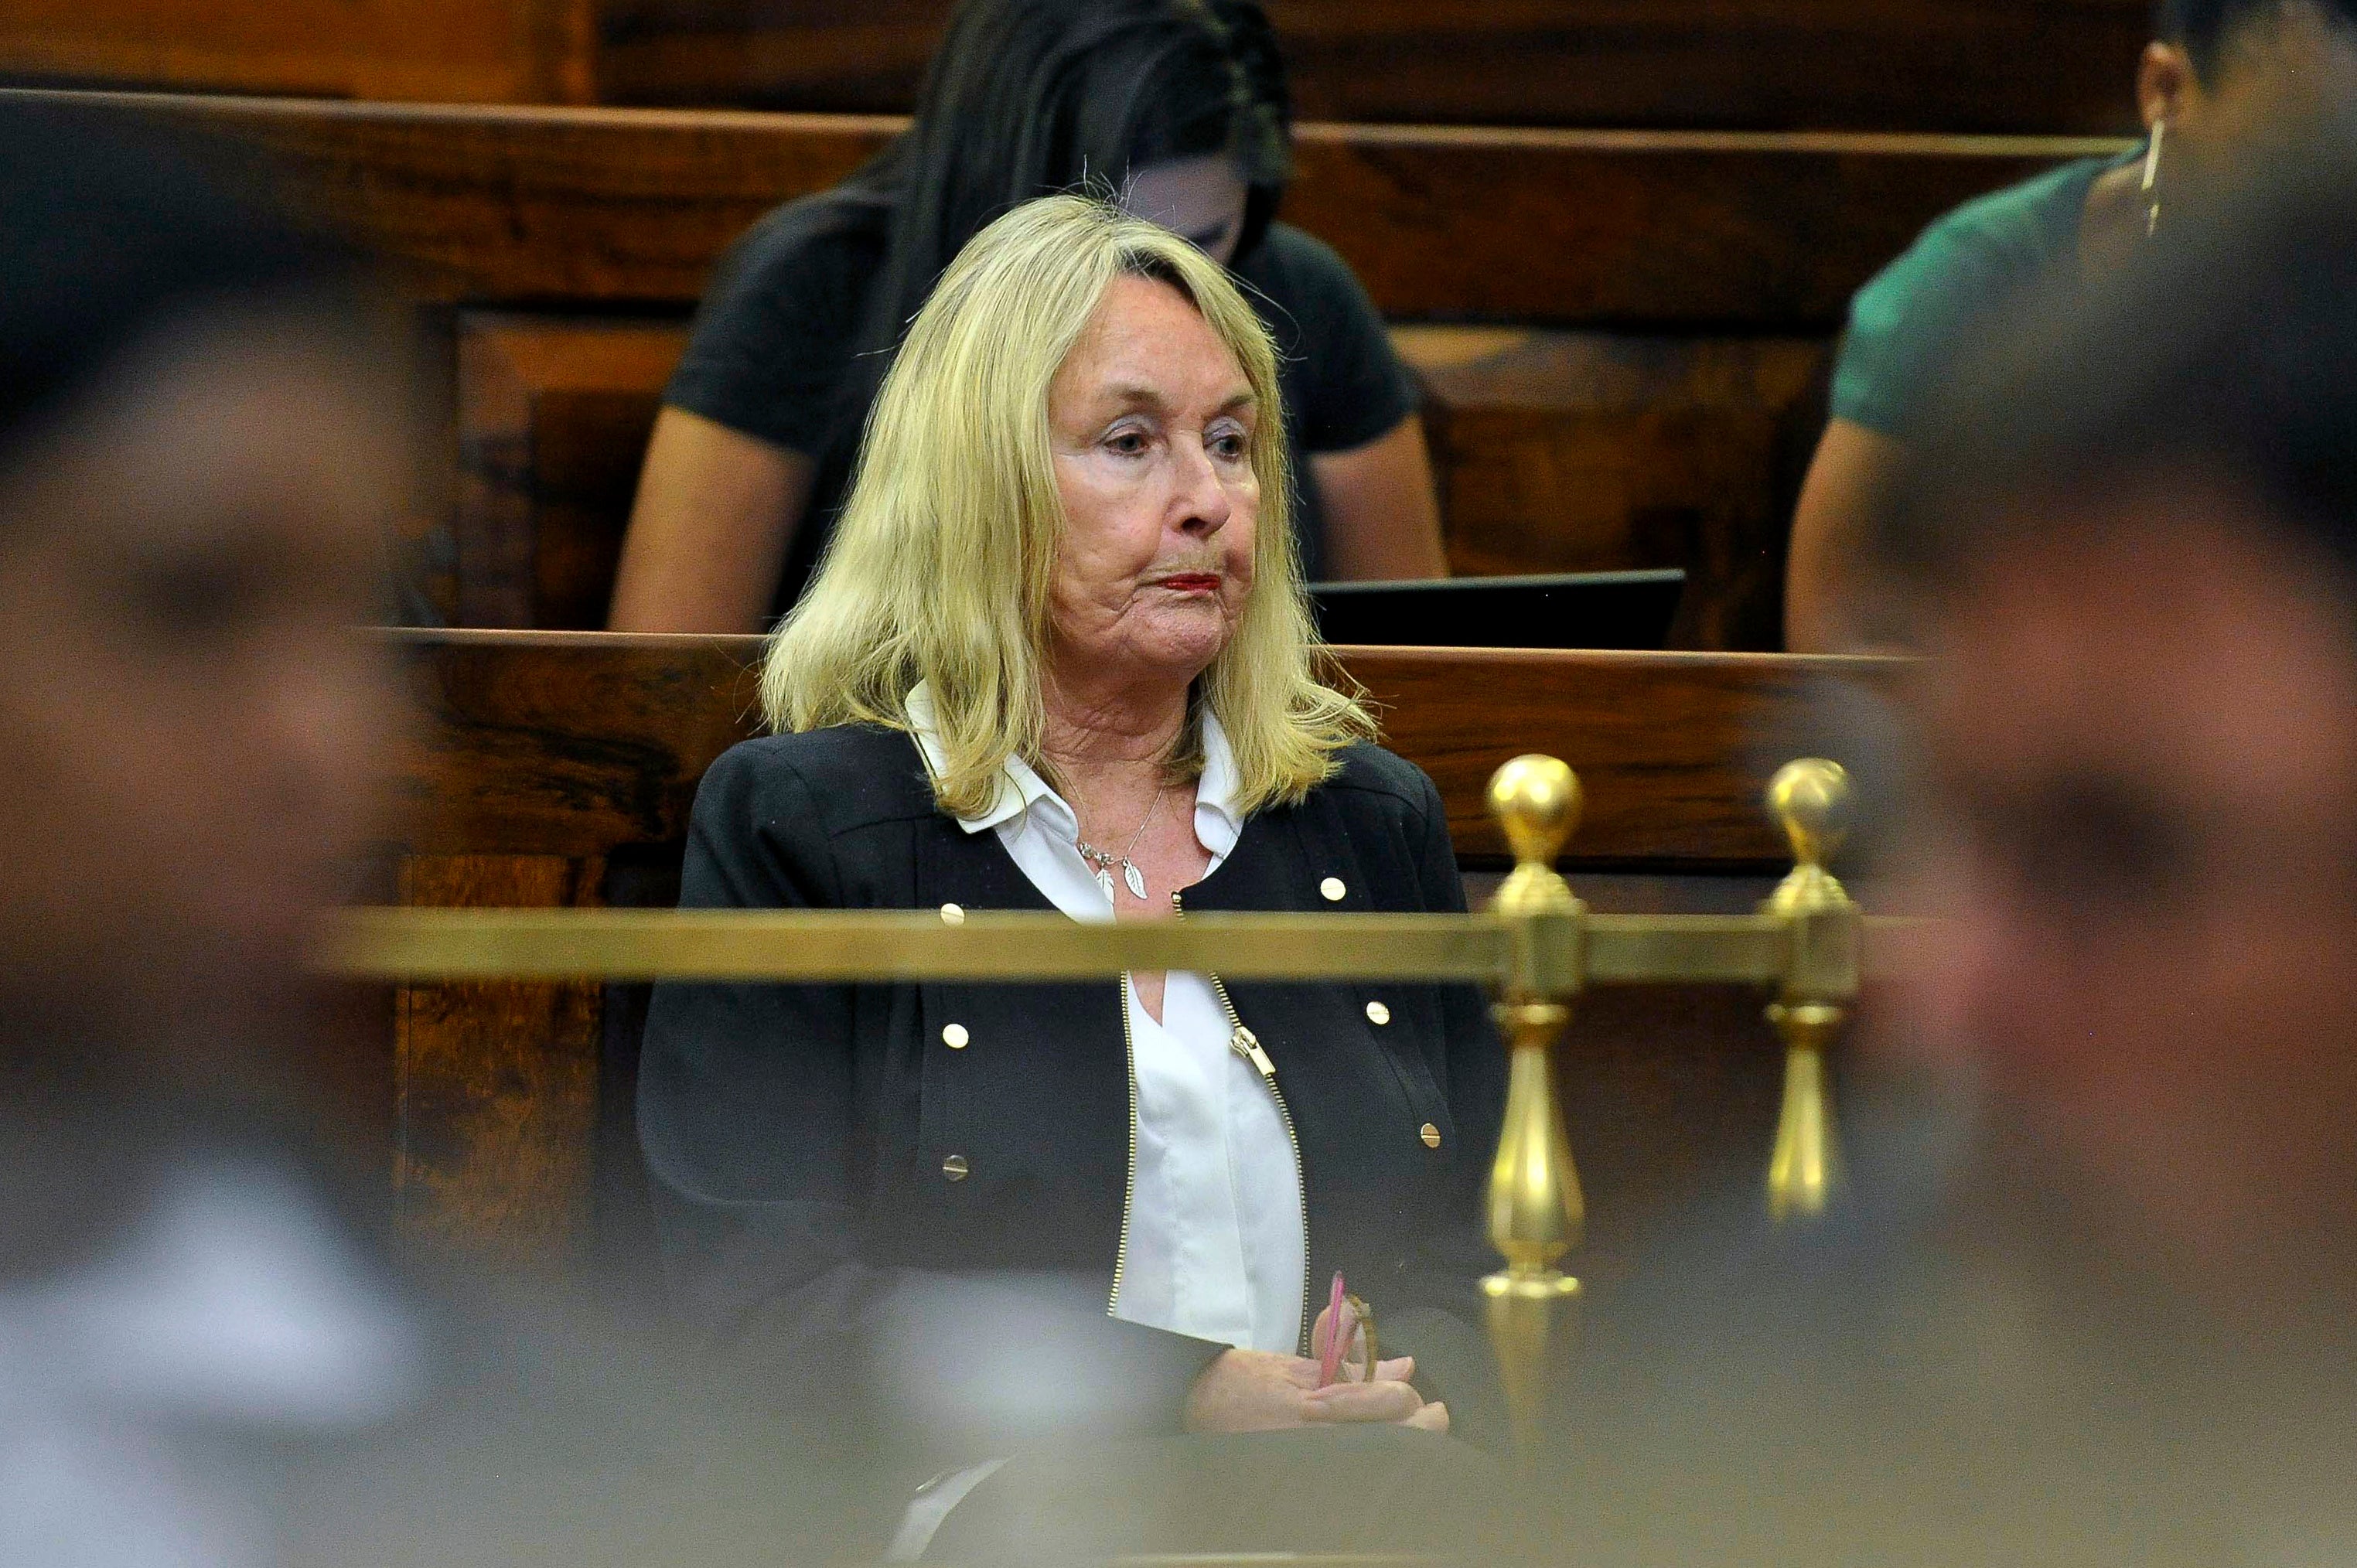 June Steenkamp said his parole conditions send a ‘clear message’ gender based violence is taken seriously